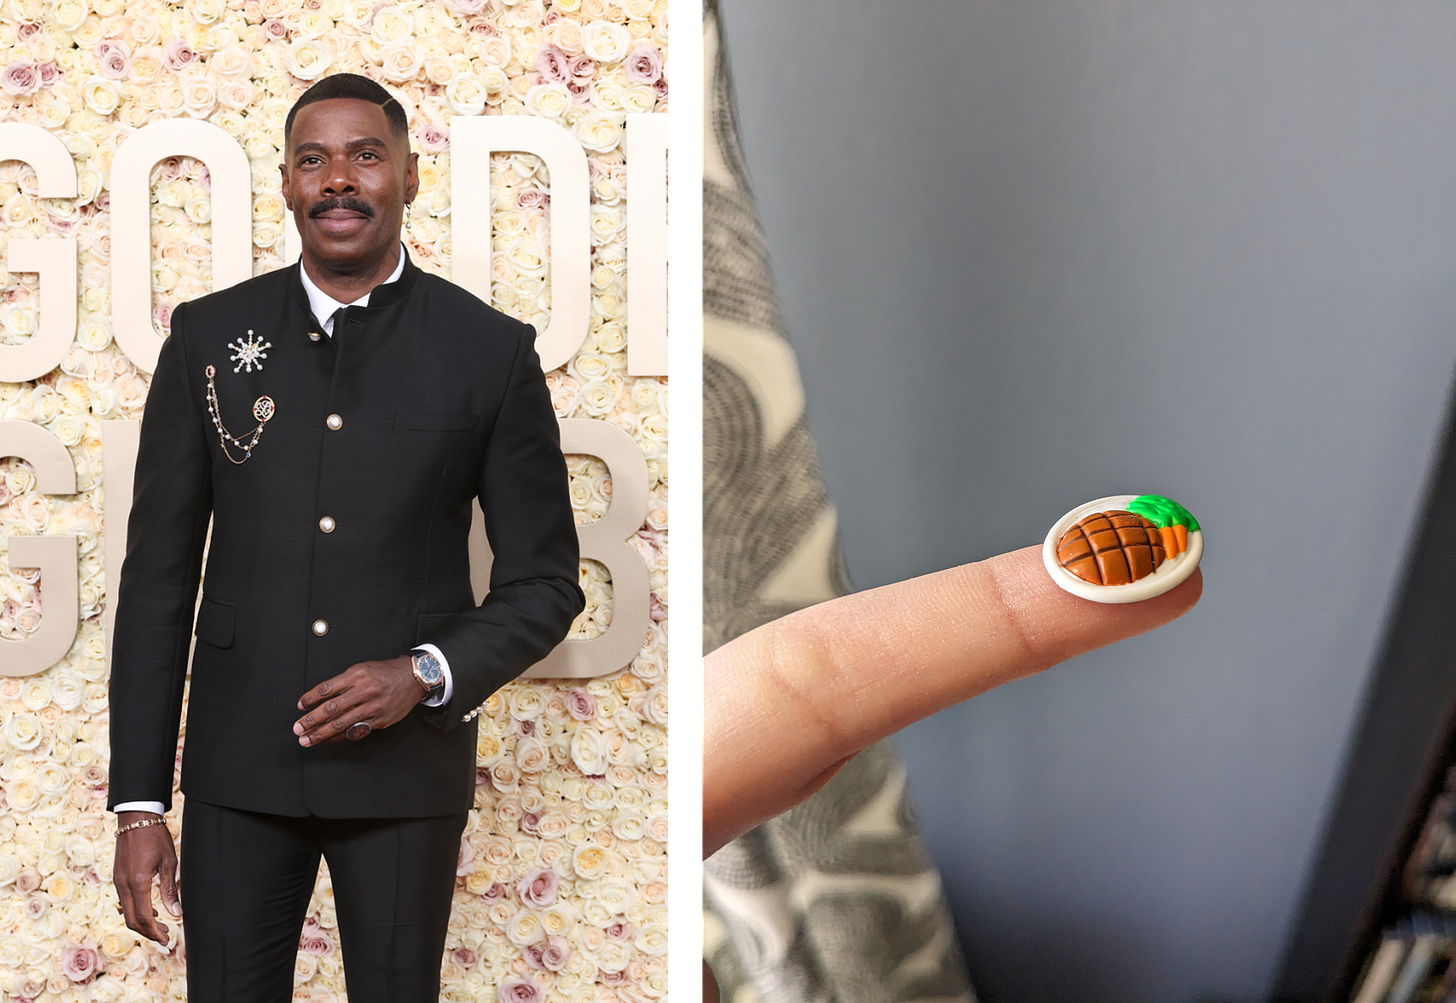 Left: Colman Domingo in a black lapel-less suit and a few distinctive brooches. Right: A plate of steak and carrots the size of a fingertip.